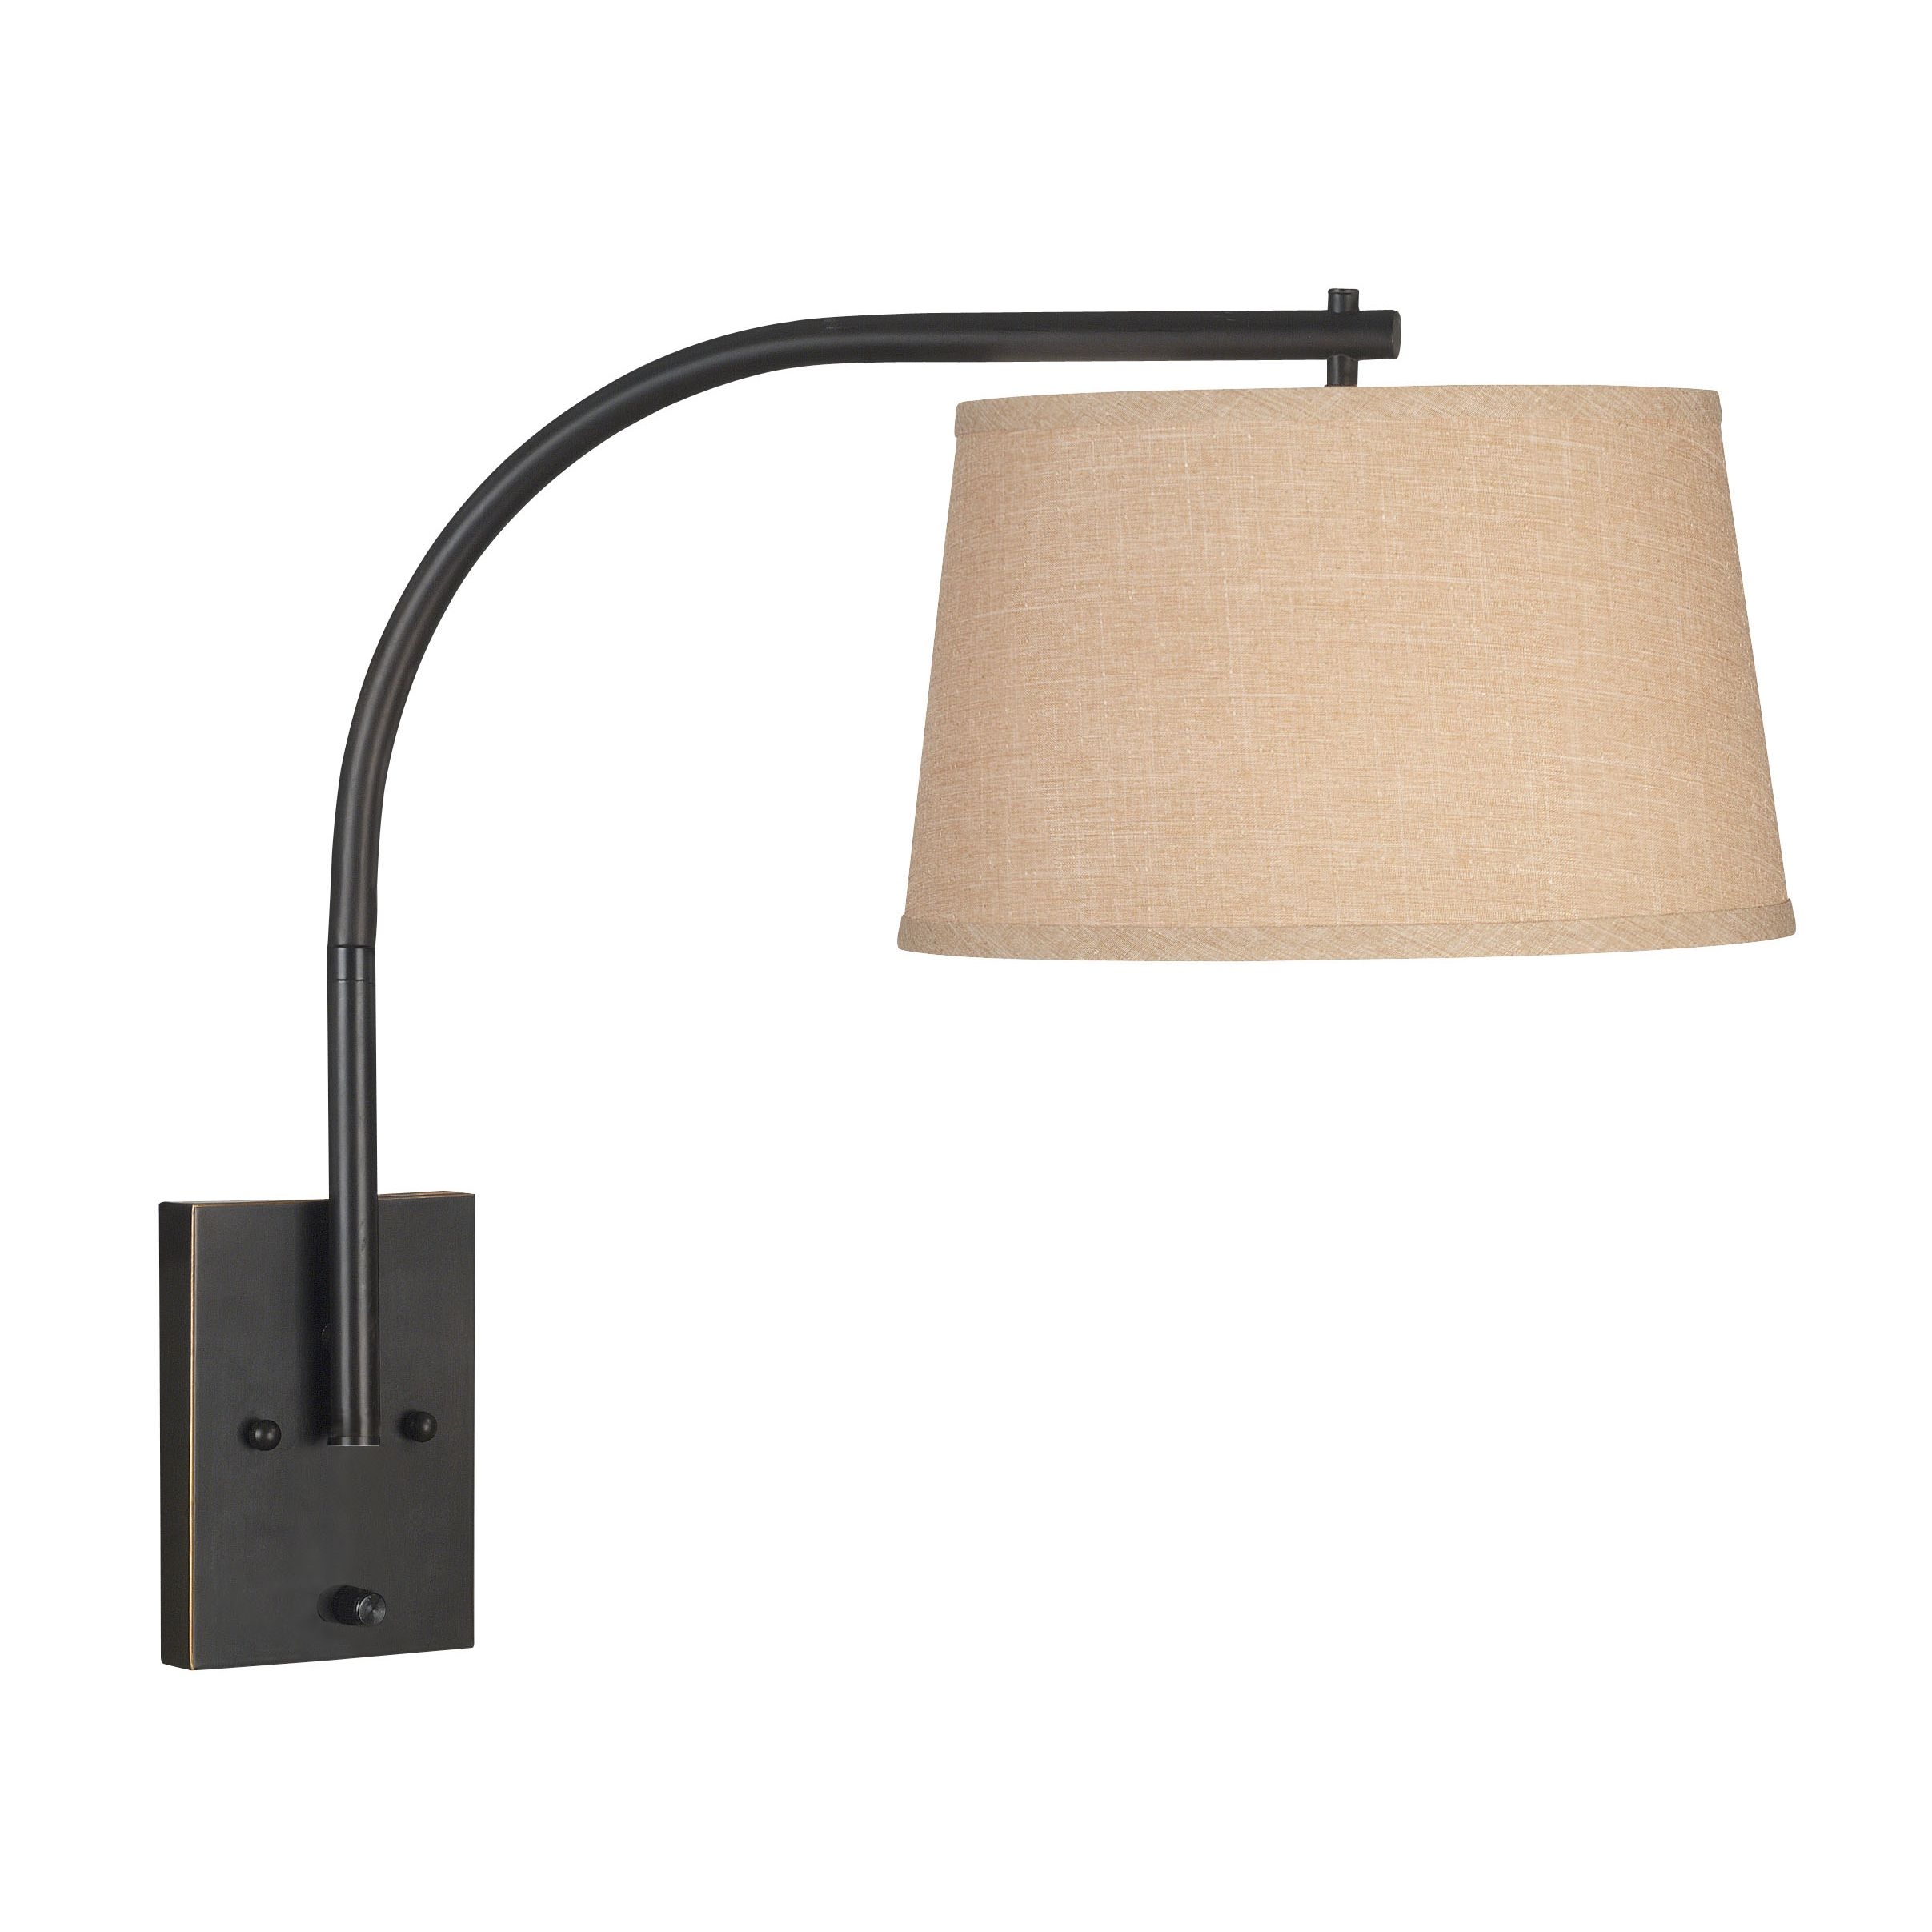 Arch swing arm wall lamp 8